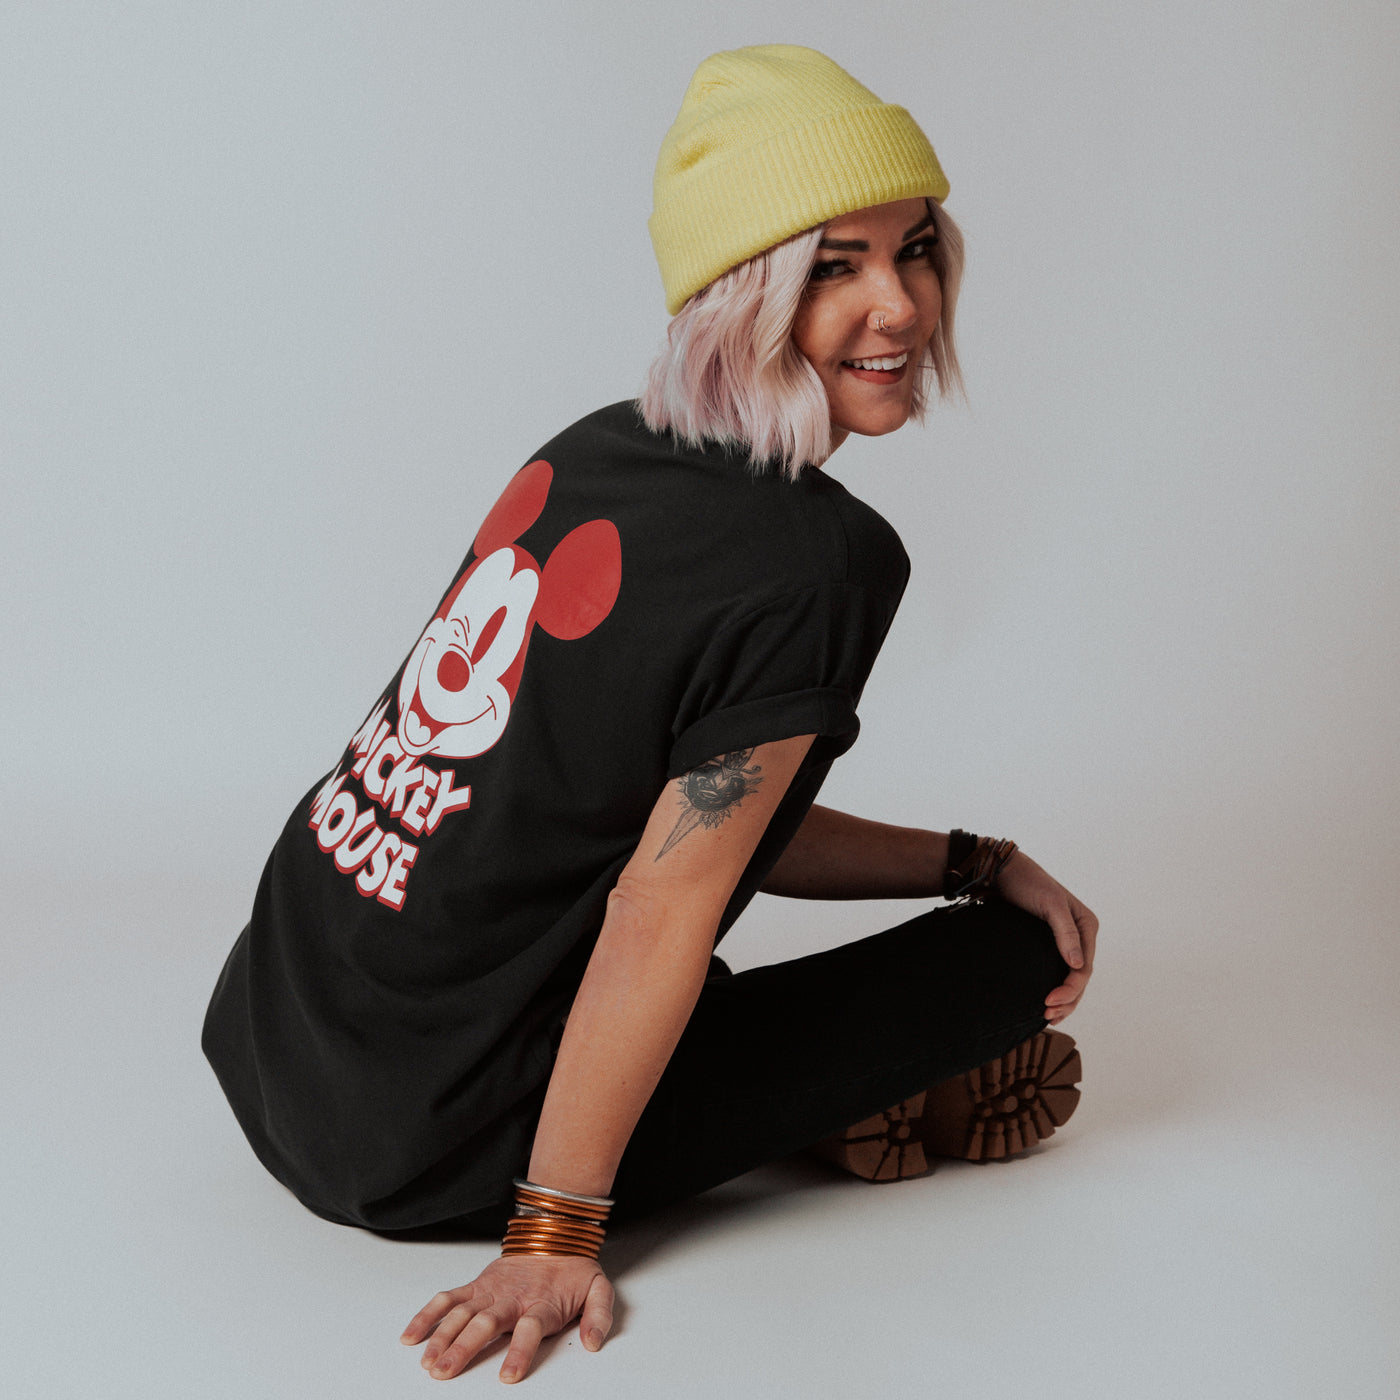 Adult Unisex Tee - 'Mickey Mouse' - Disney Collection from Rags